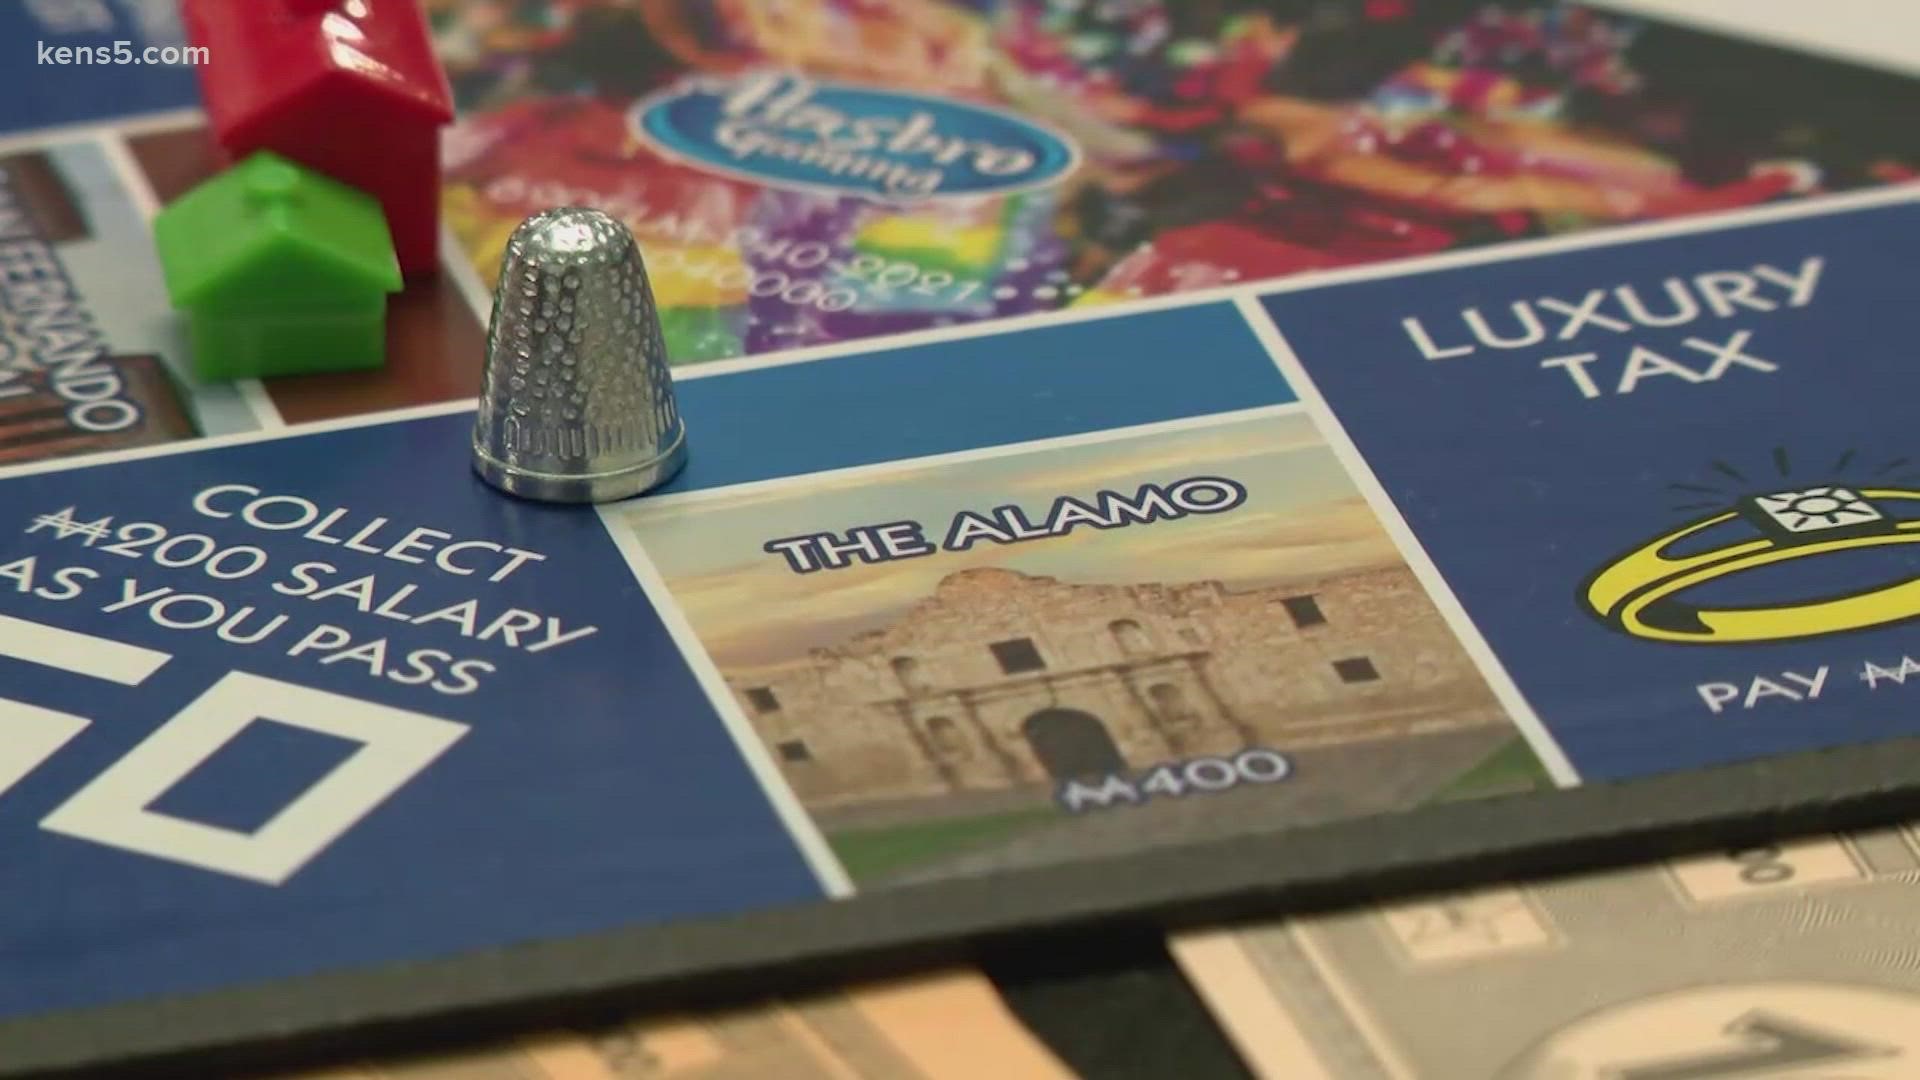 The San Antonio version of the famous Monopoly game was presented during a ceremony at the Menger Hotel on Wednesday.